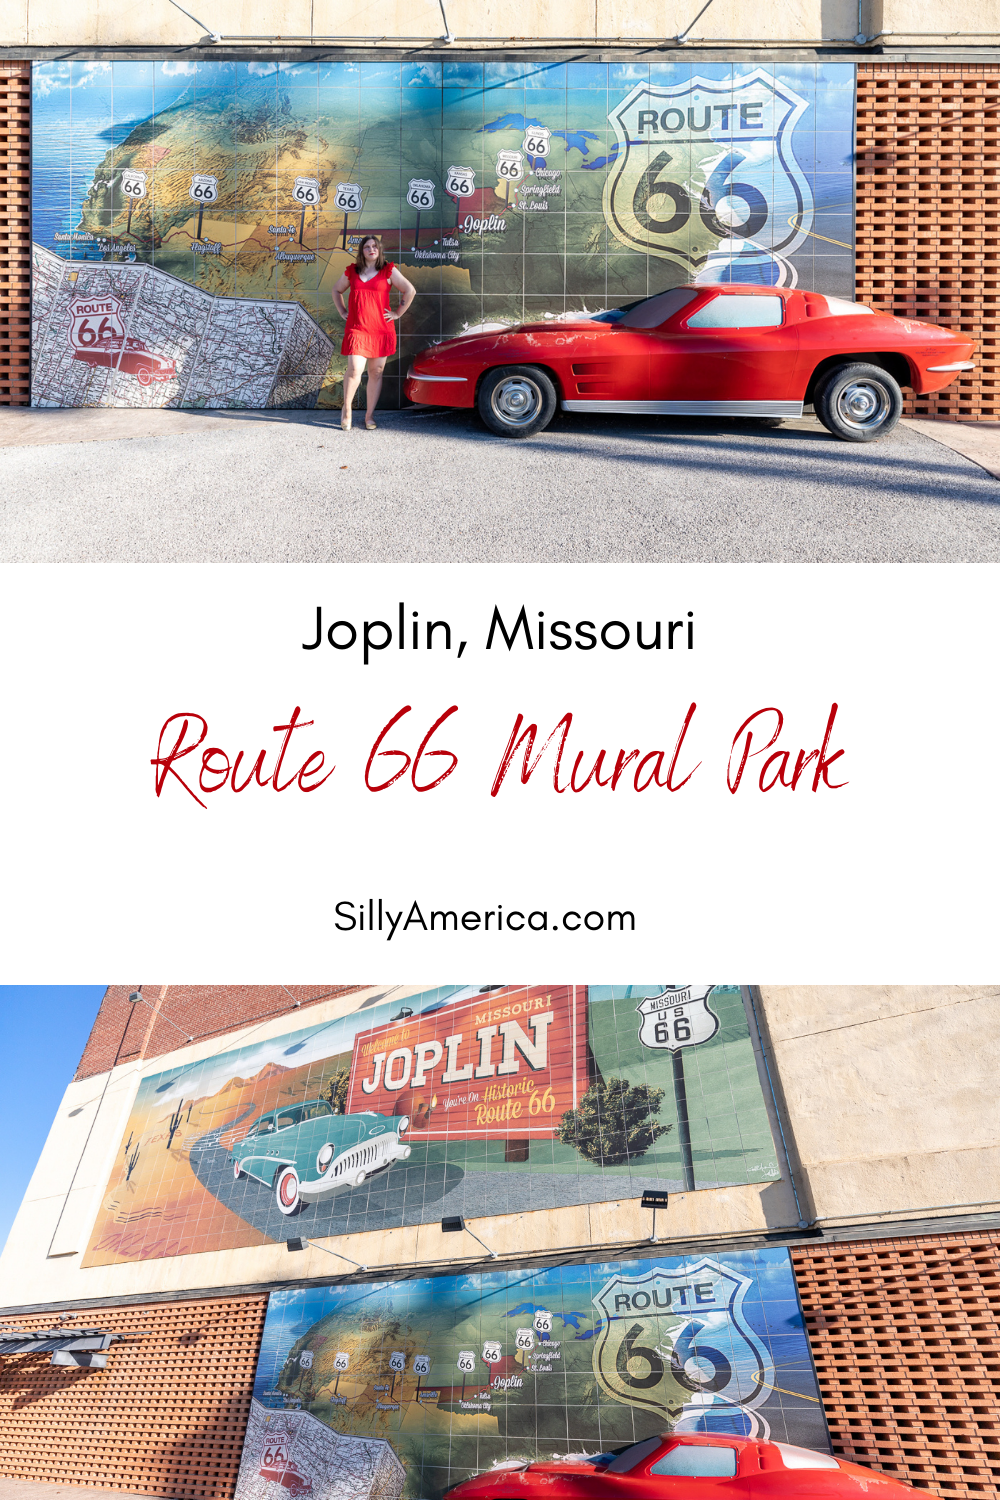 You won't find any swings, slides, or greenery in this roadside park. But you will find an artful tribute to the past. Route 66 Mural Park in Joplin, Missouri celebrates the town's history with the Mother Road with two murals and the perfect selfie photo op. Visit on your Route 66 road trip in Missouri. #RoadTrips #RoadTripStop #Route66 #Route66RoadTrip #MissouriRoute66 #Missouri #MissouriRoadTrip #MissouriRoadsideAttractions #RoadsideAttractions #RoadsideAttraction #RoadsideAmerica #RoadTrip